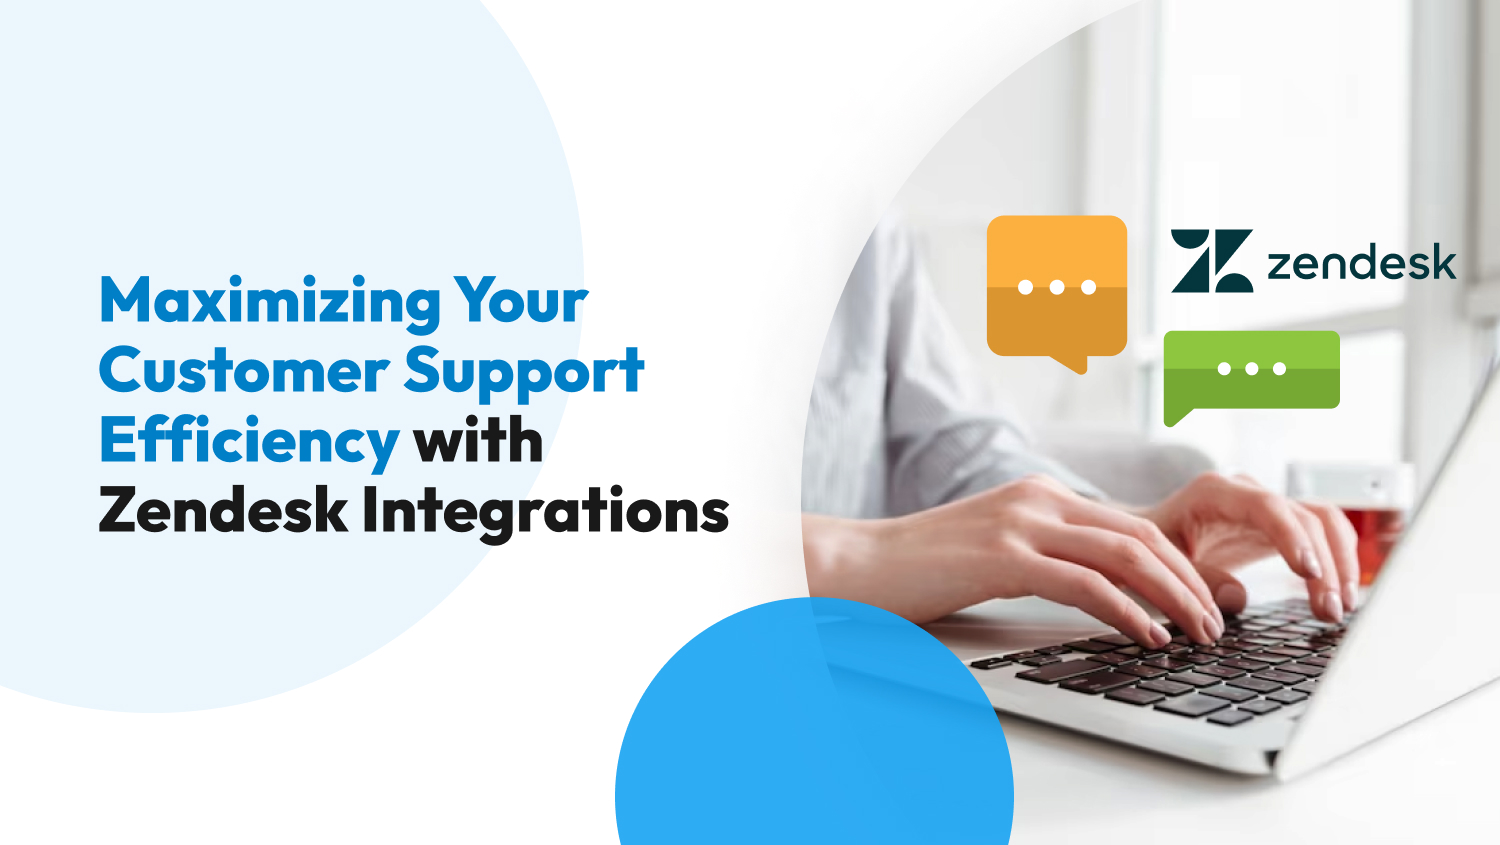 Maximizing Your Customer Support Efficiency with Zendesk Integrations